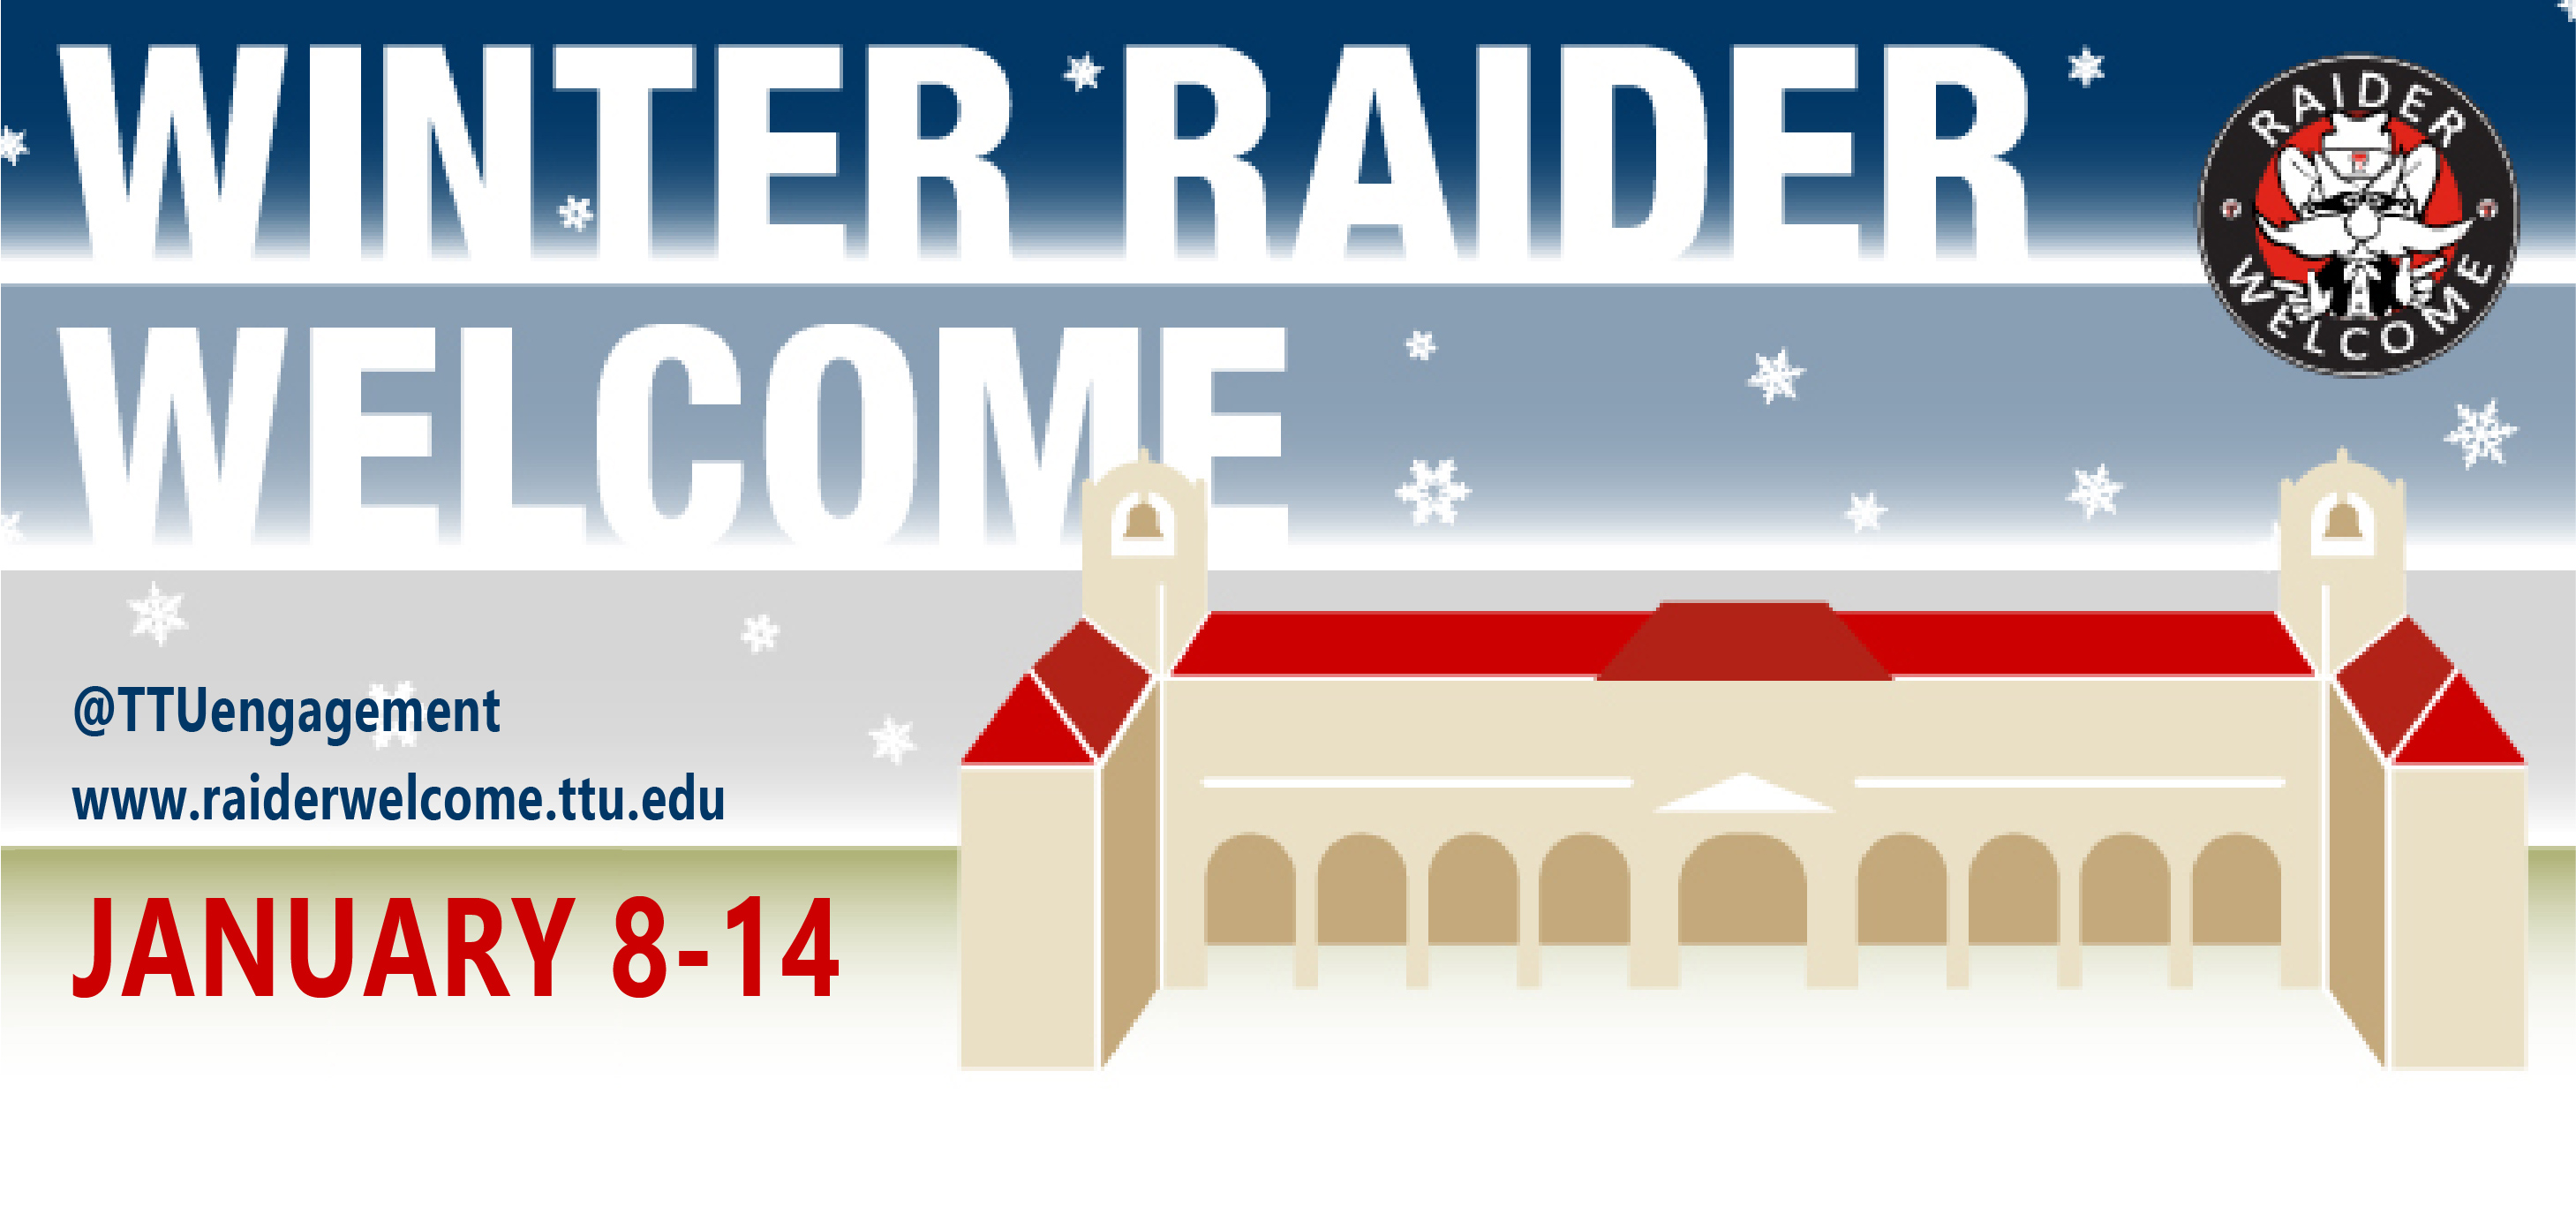 Winter Raider Welcome. It'll be a blast! The fun starts January 9. Follow us on Instagram and Twitter @ttuengagement.